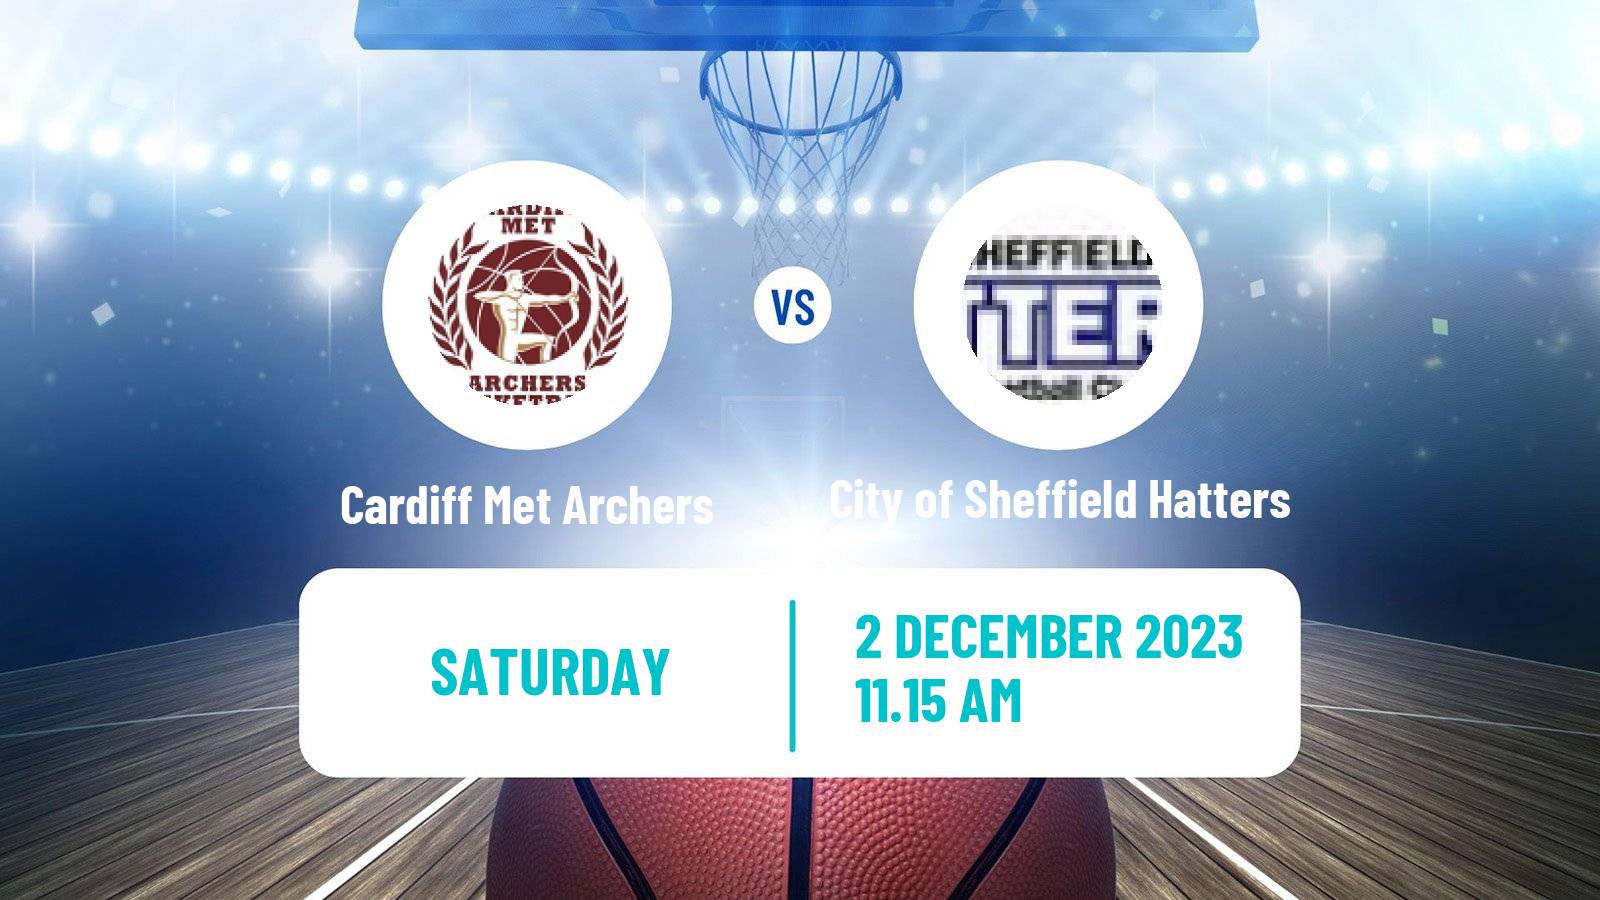 Basketball British WBBL Cardiff Met Archers - City of Sheffield Hatters